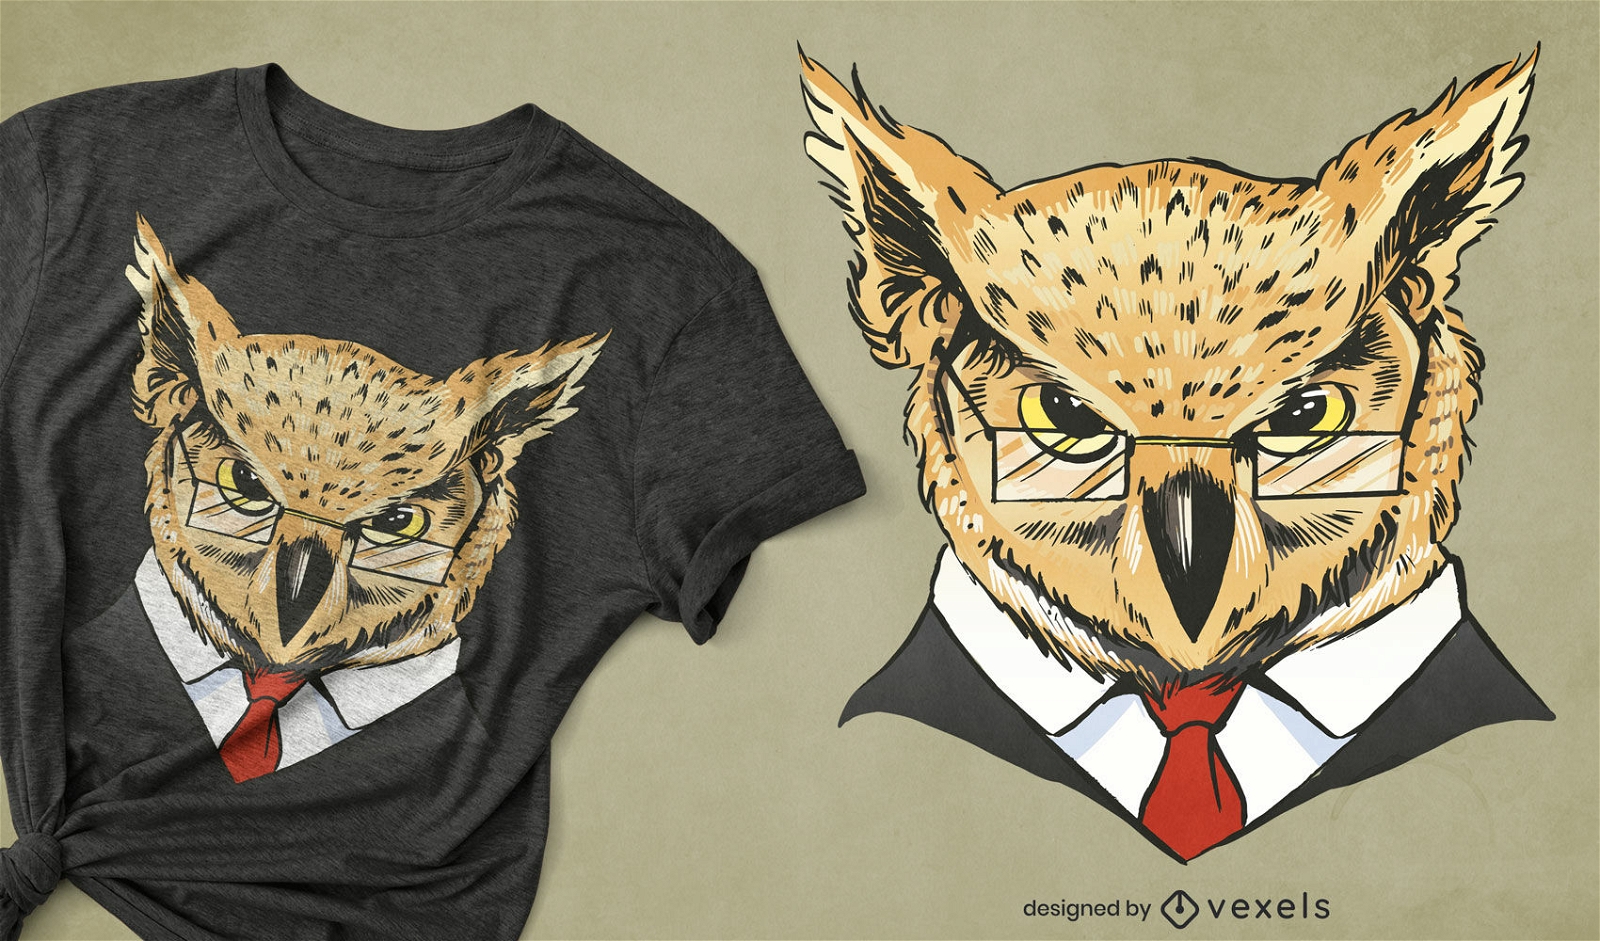 Owl with glasses and suit t-shirt design